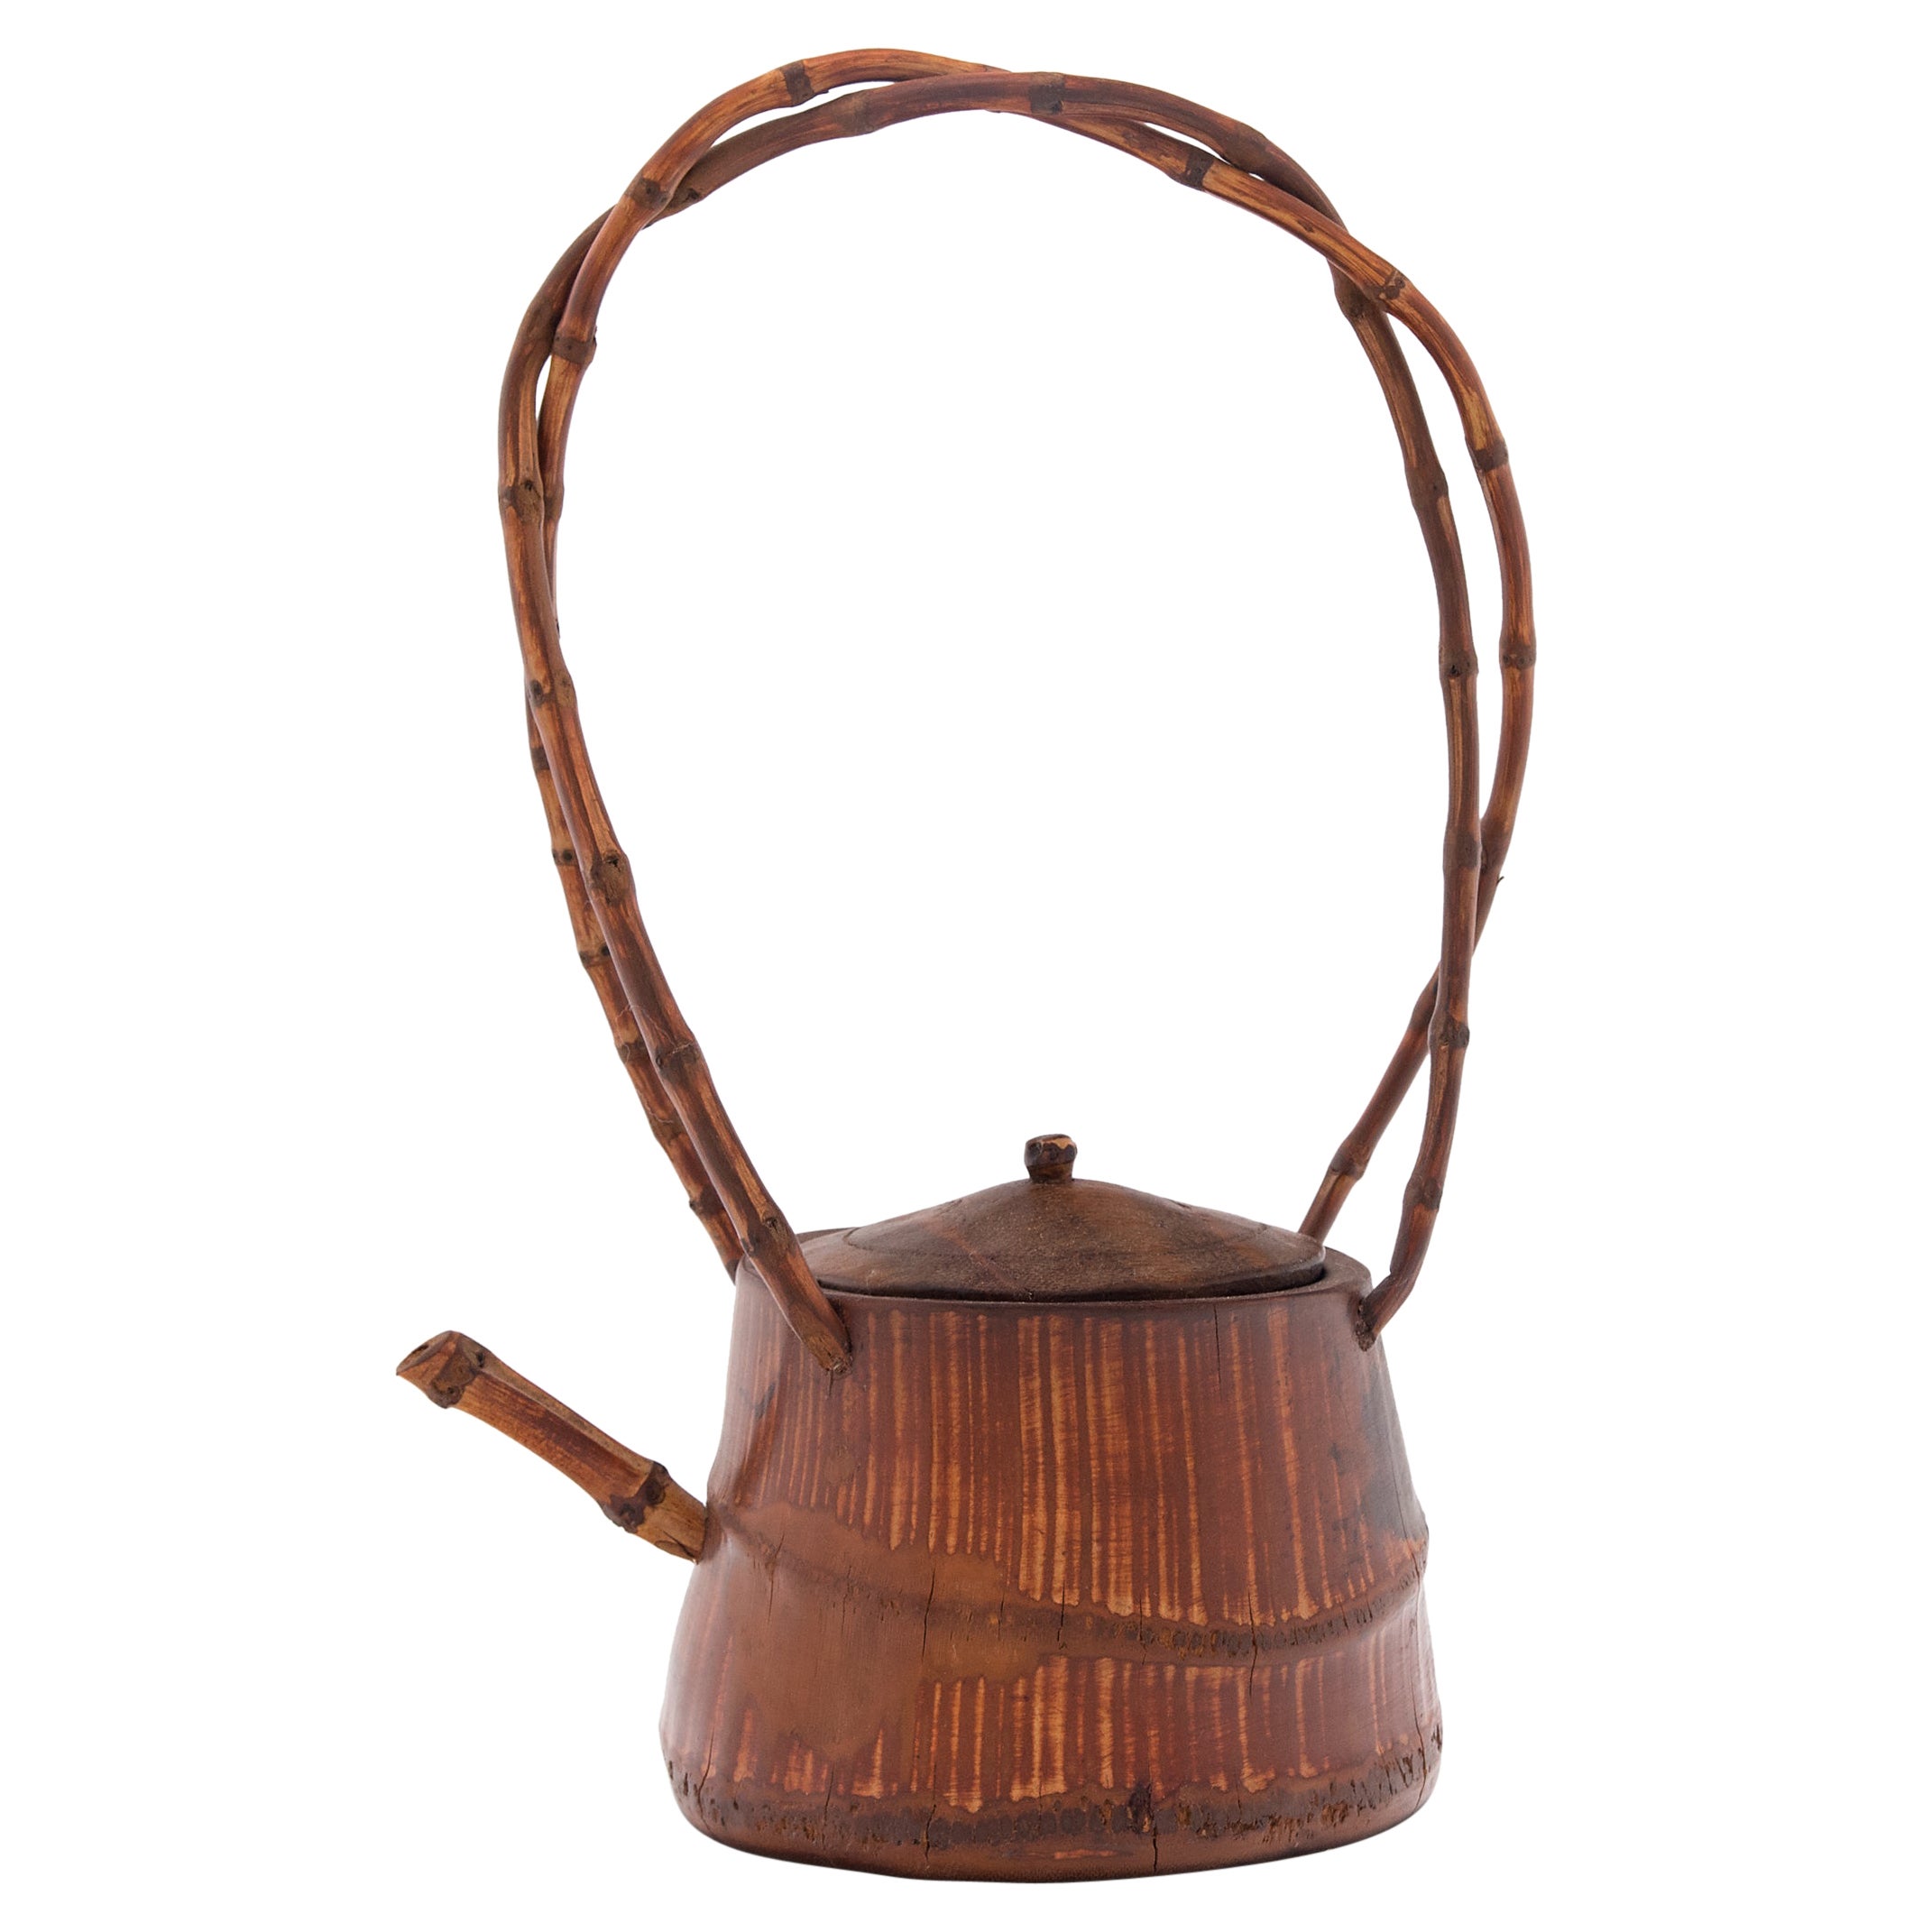 Chinese Bamboo Teapot with Arched Handle, c. 1900